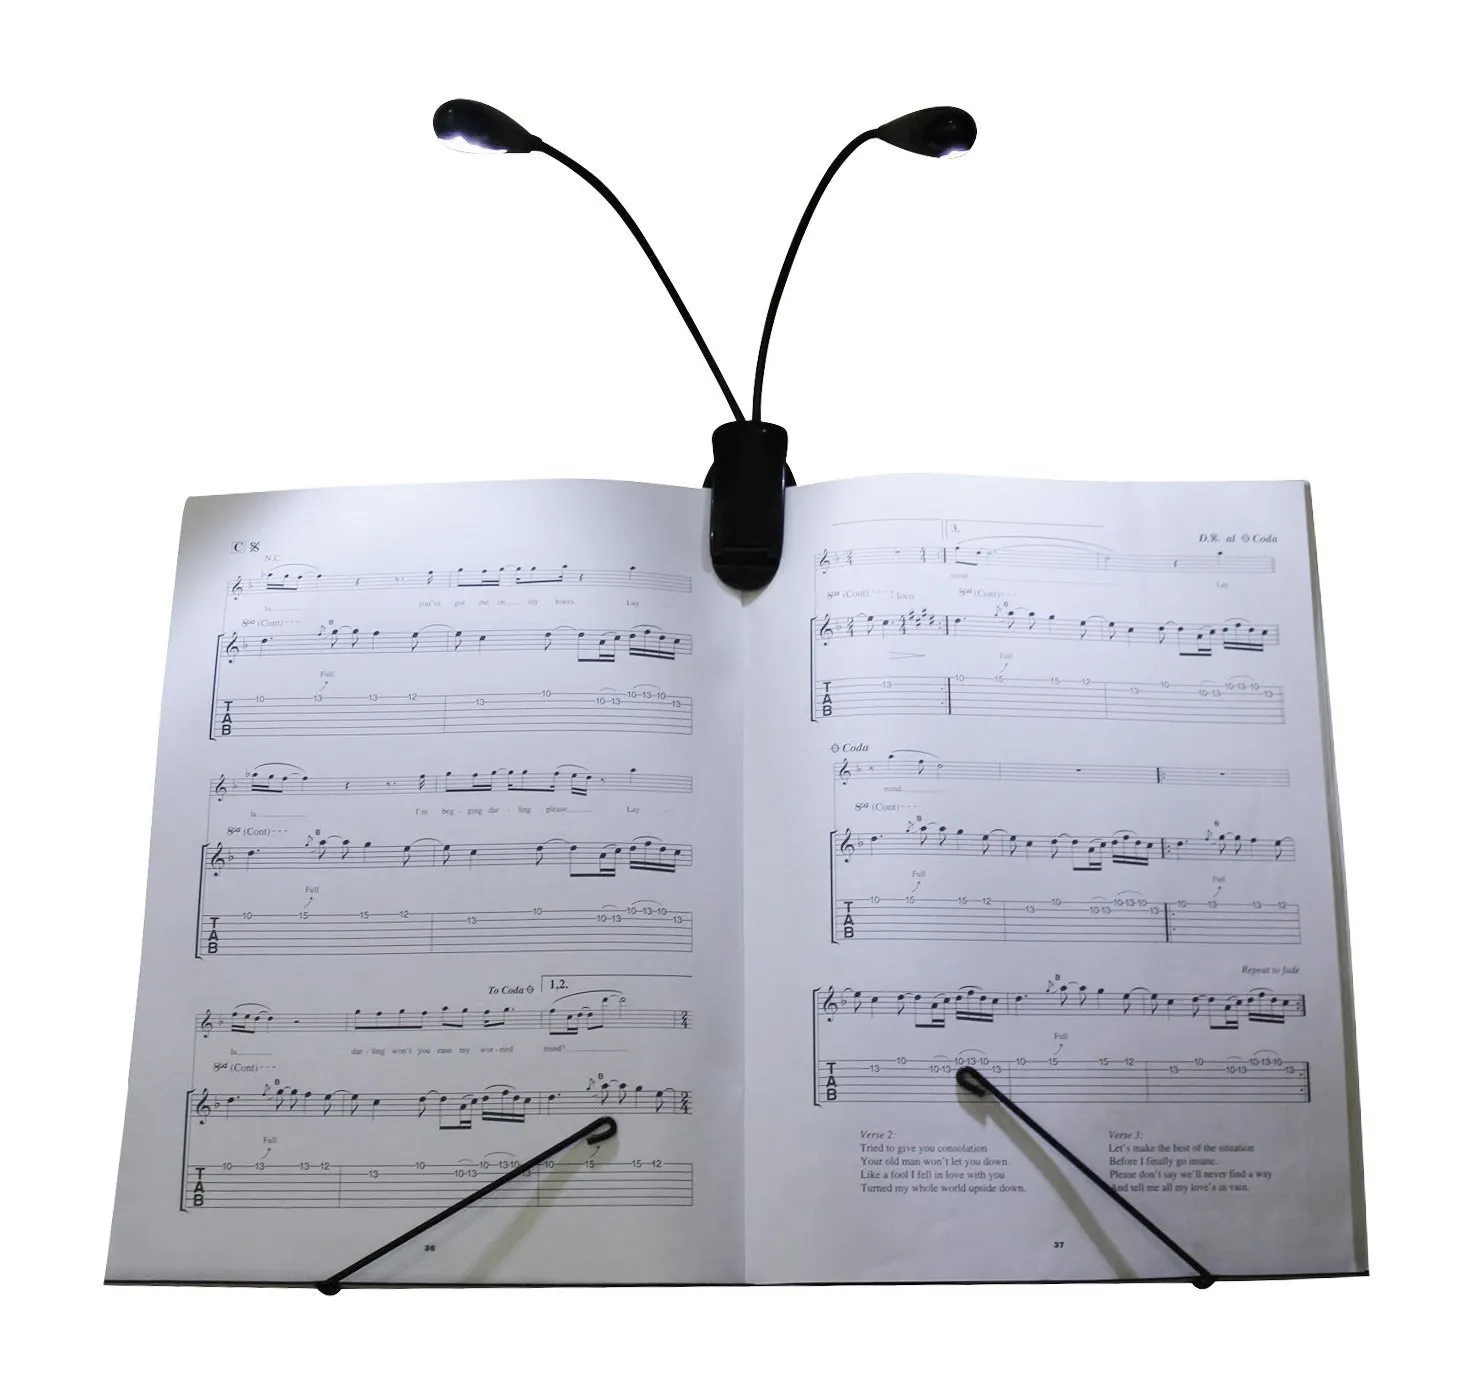 Gadget Flexible Clip-On clip Dual LED 2 Arms Musical Stands Reading ebook e-book Light Lamp For Read BOOKS Music Stand,LAPTOPS FAST SHIP